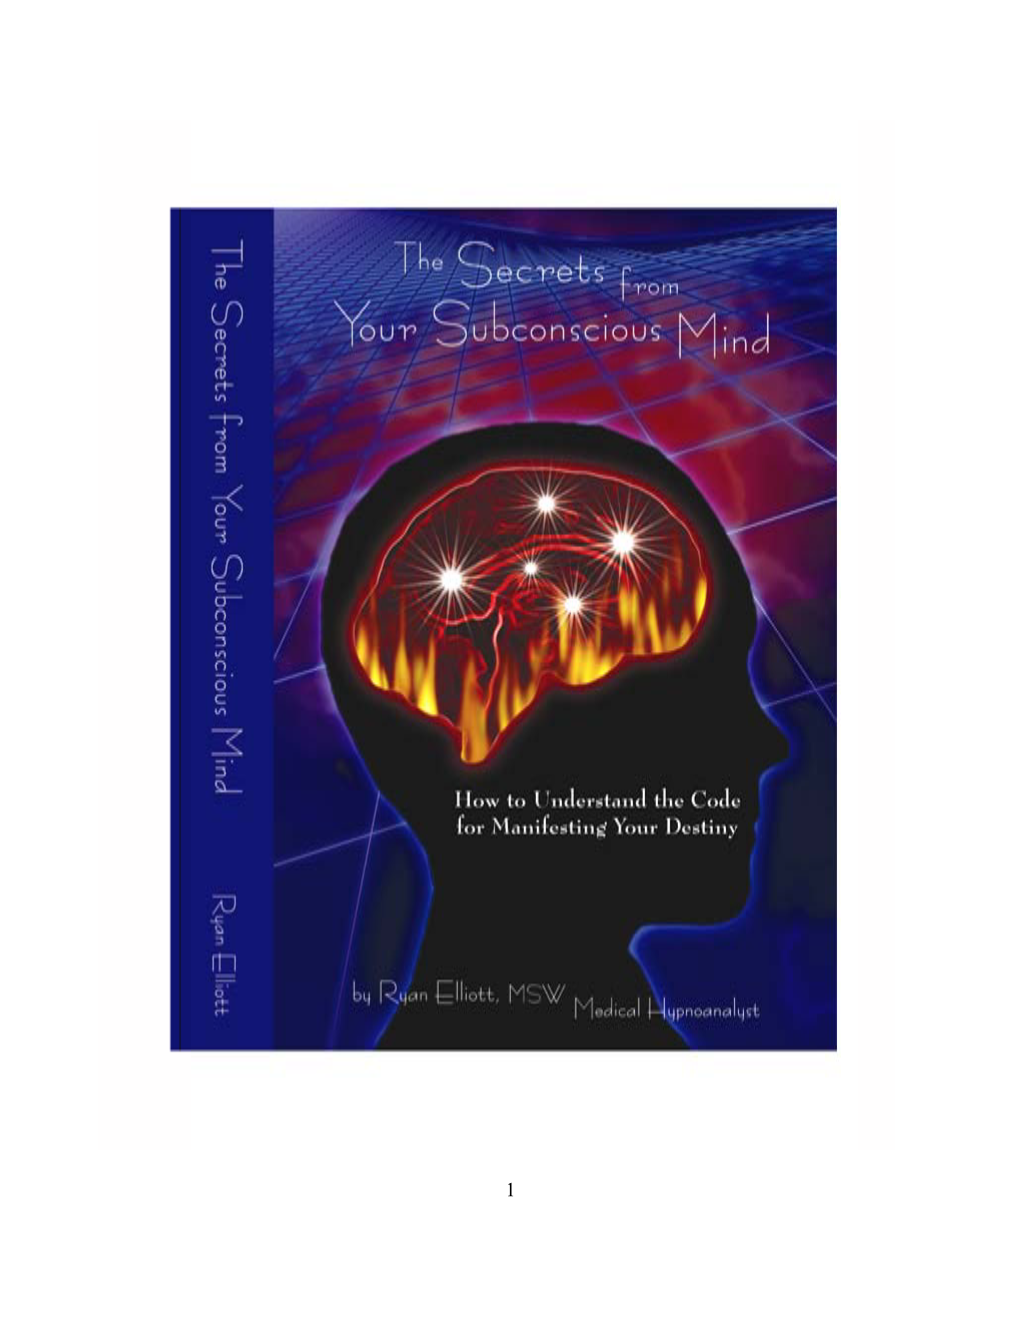 Download:The Secrets from Your Subconscious Mind, 3 Chapters Free